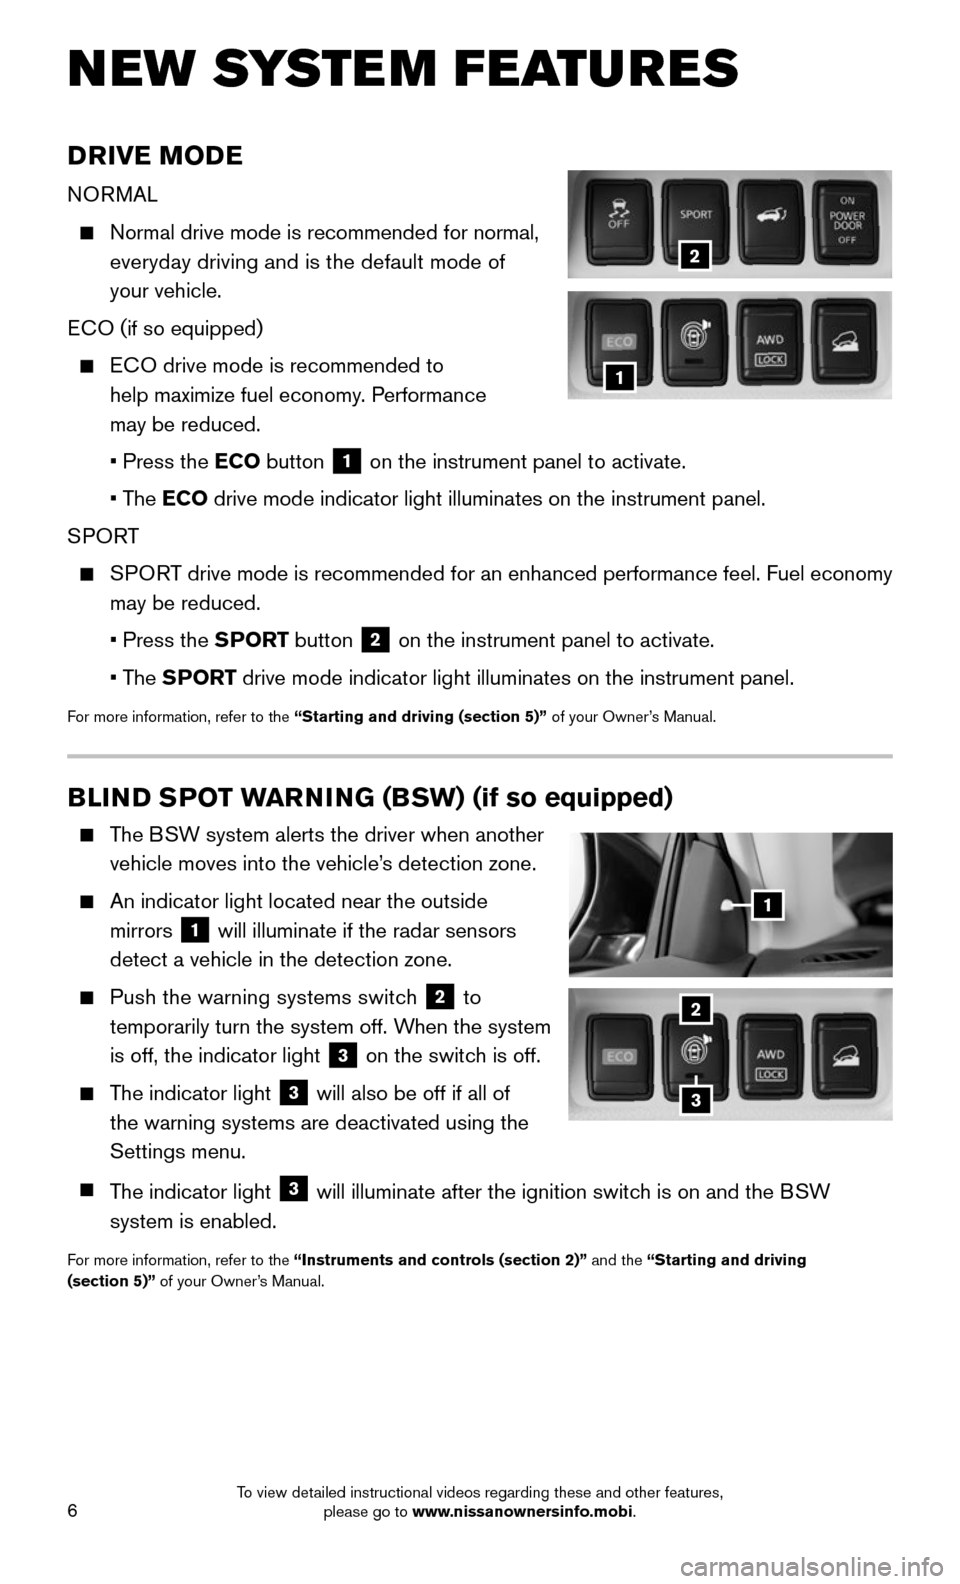 NISSAN ROGUE 2016 2.G Quick Reference Guide 6
BLIND SPOT WARNING (BSW) (if so equipped)
    The BSW system alerts the driver when another 
vehicle moves into the vehicle’s detection zone.
    An indicator light located near the outside  
mirr